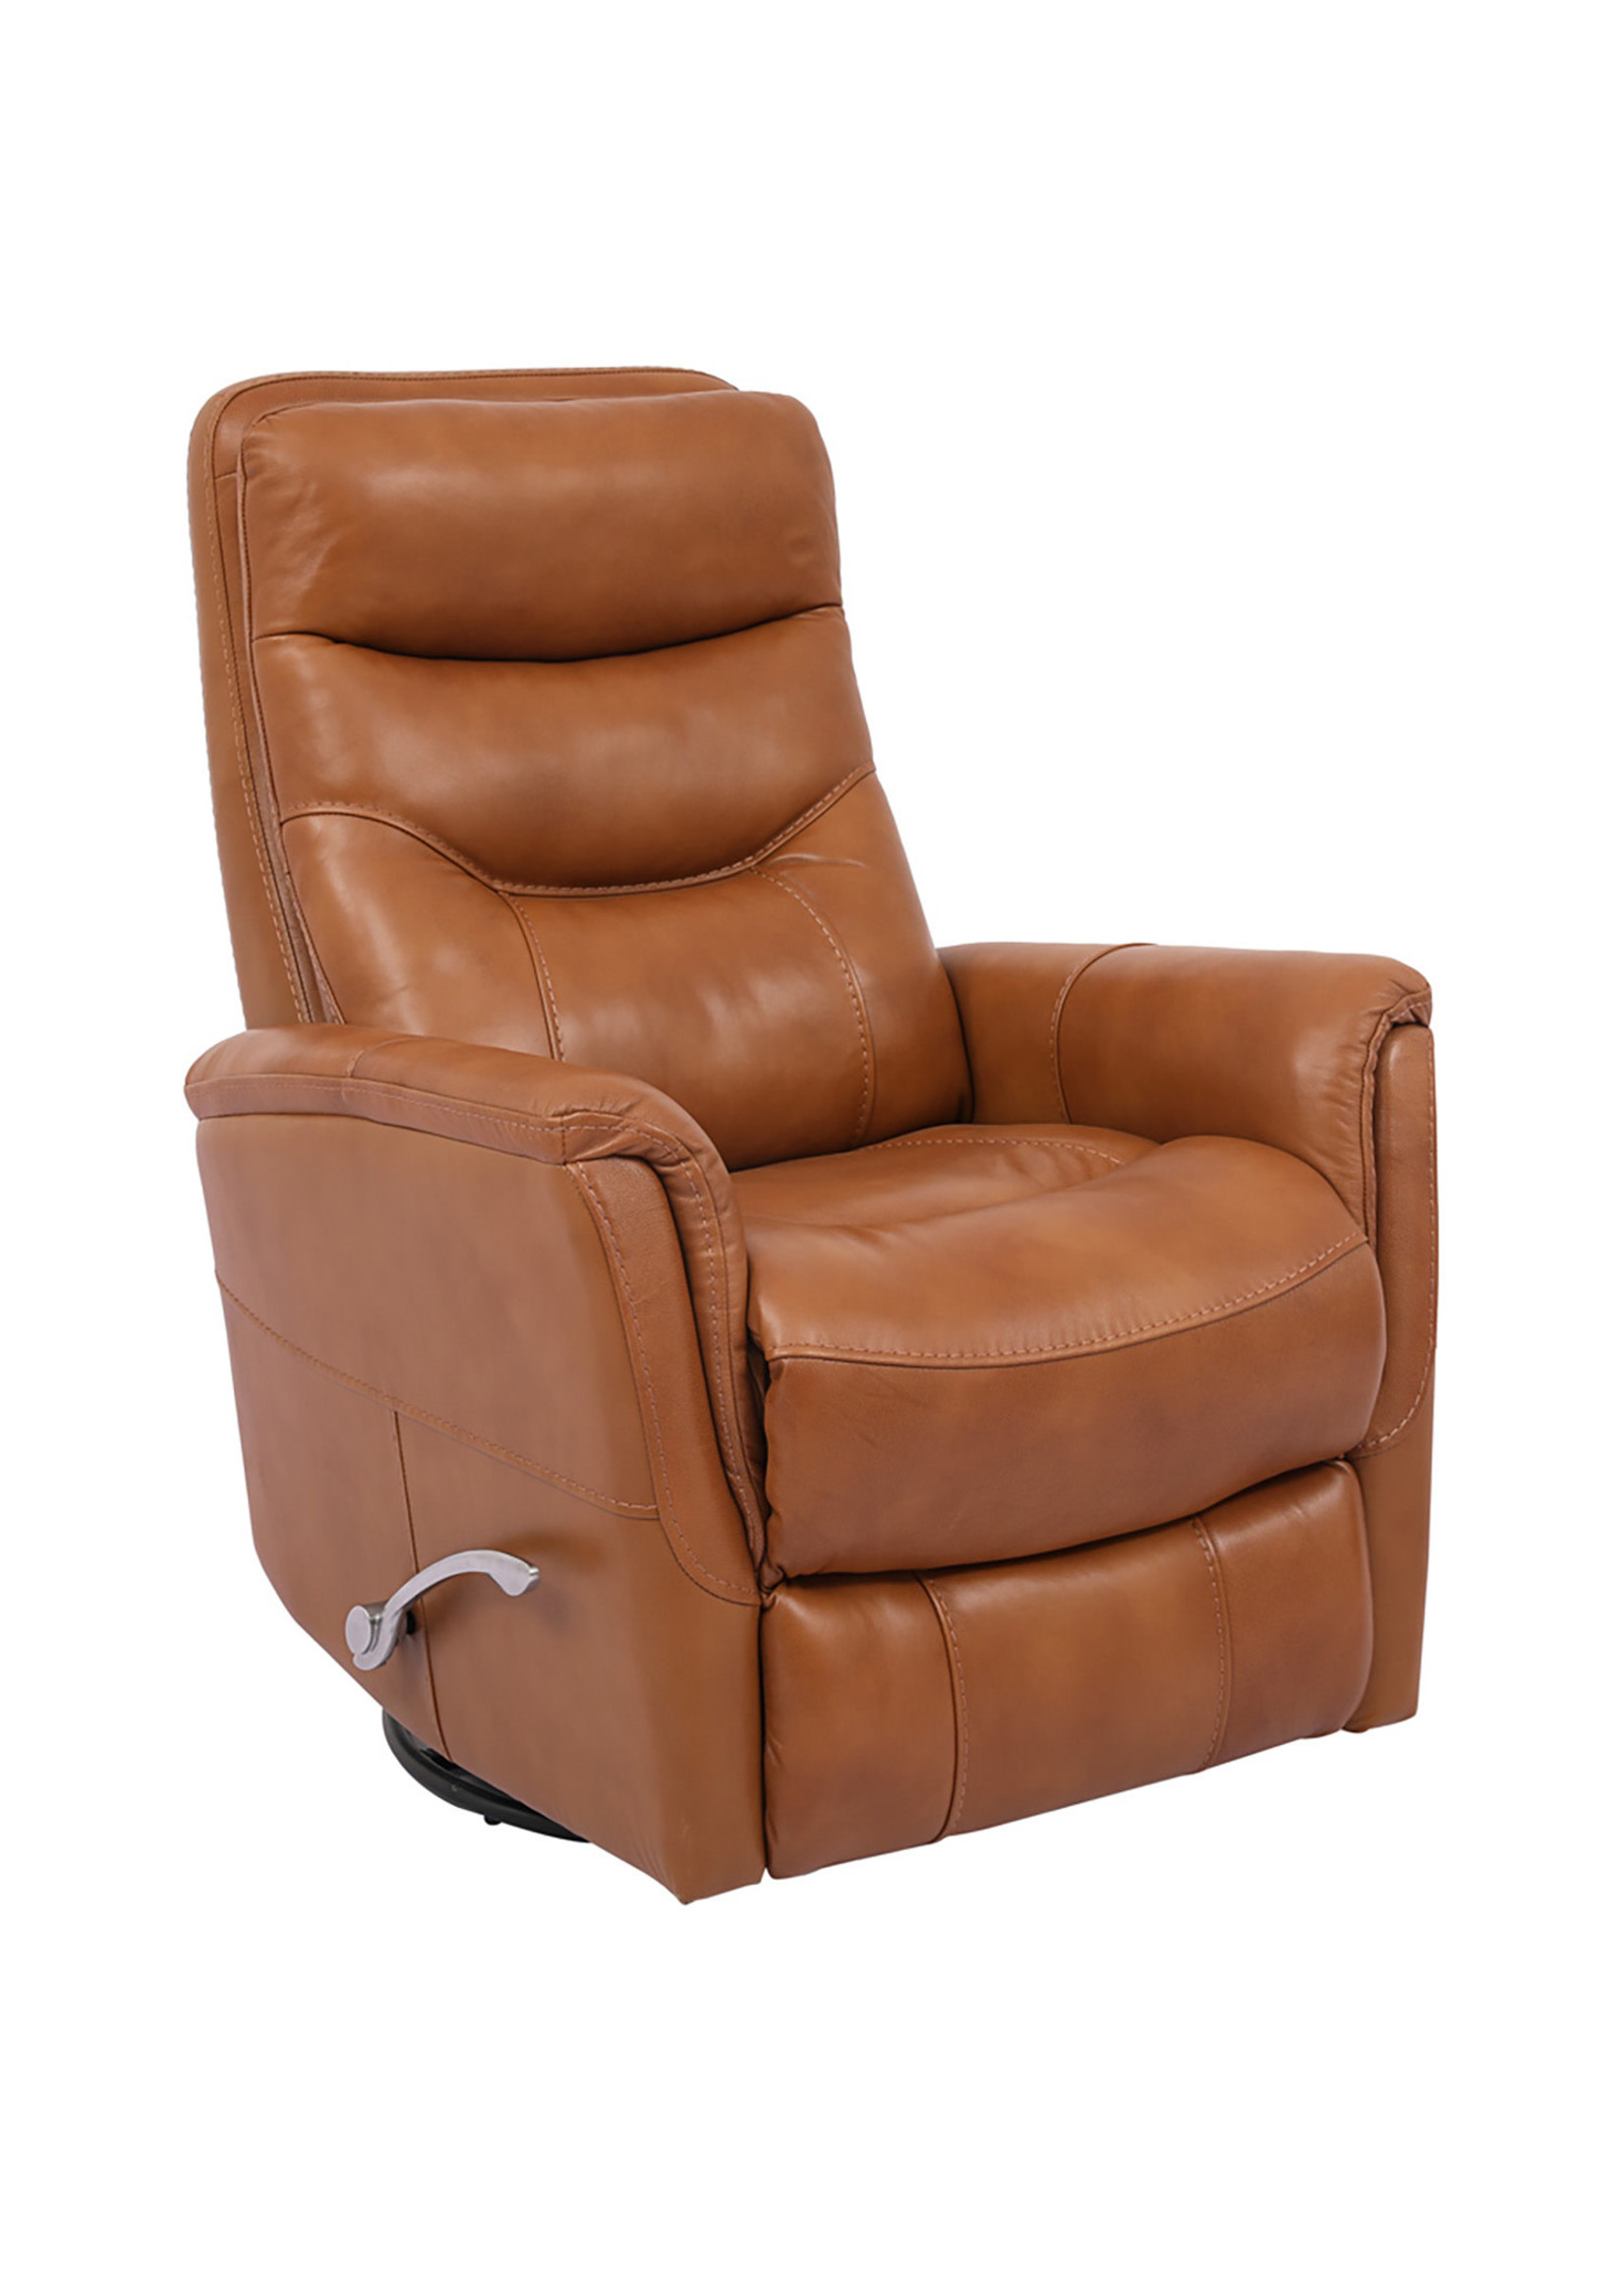 New Butterscotch Gemini Real Leather Recliner